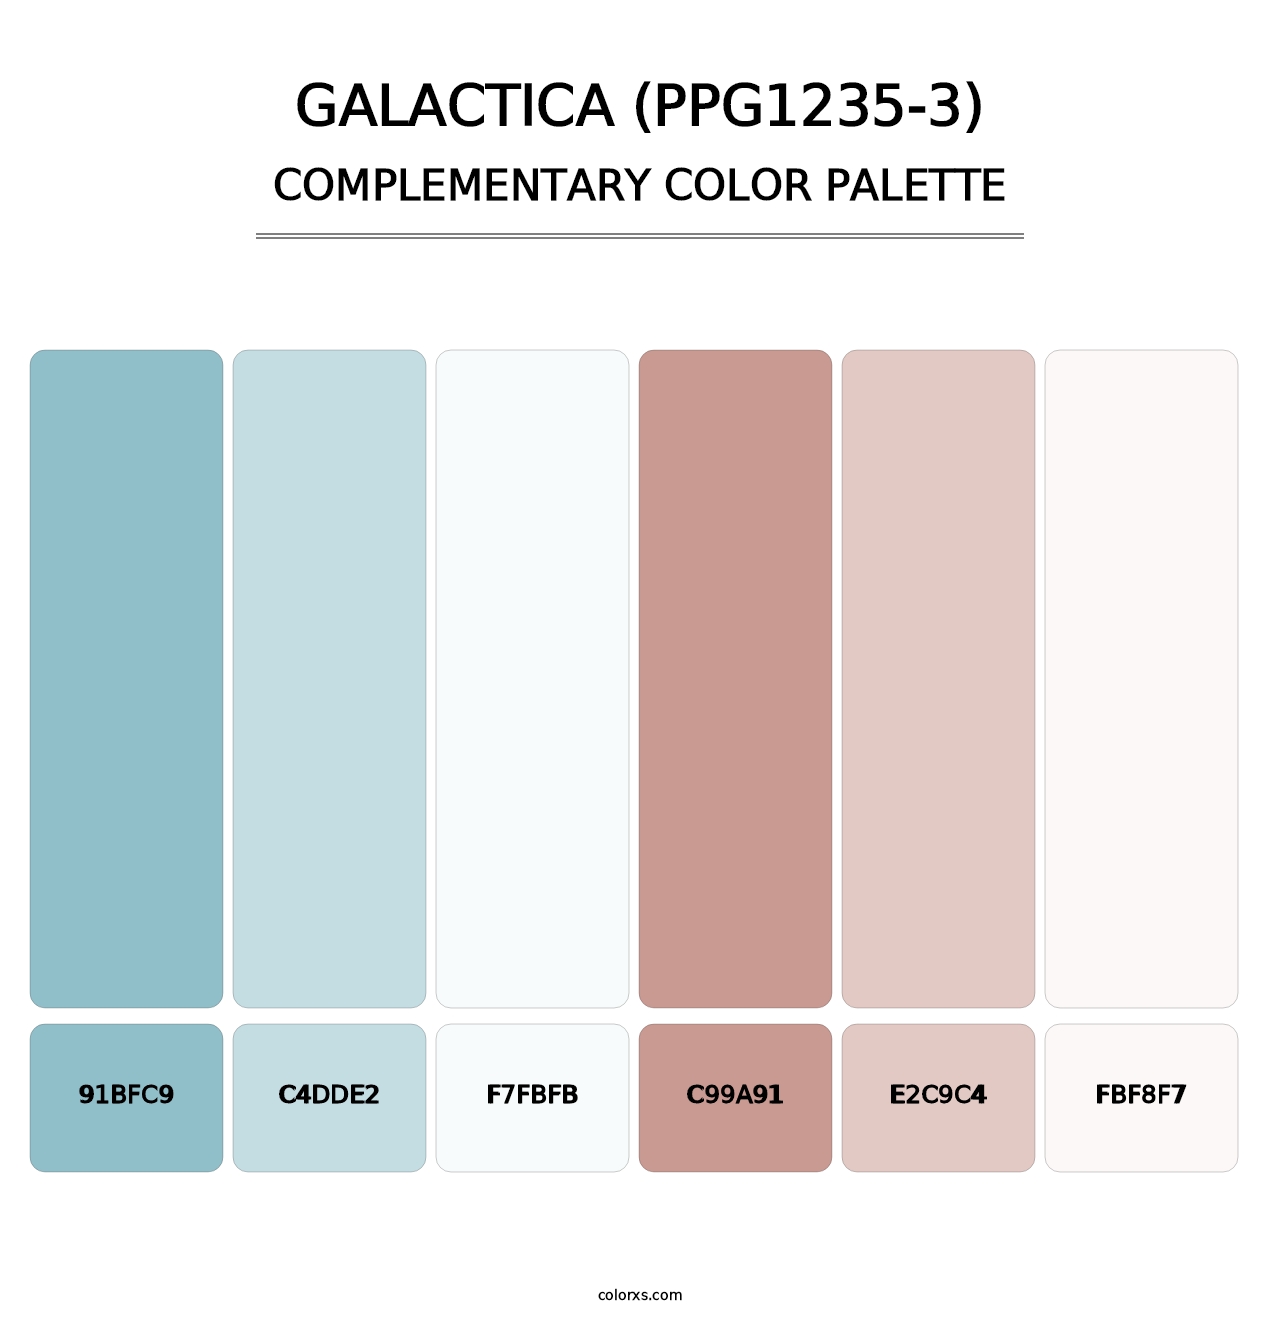 Galactica (PPG1235-3) - Complementary Color Palette